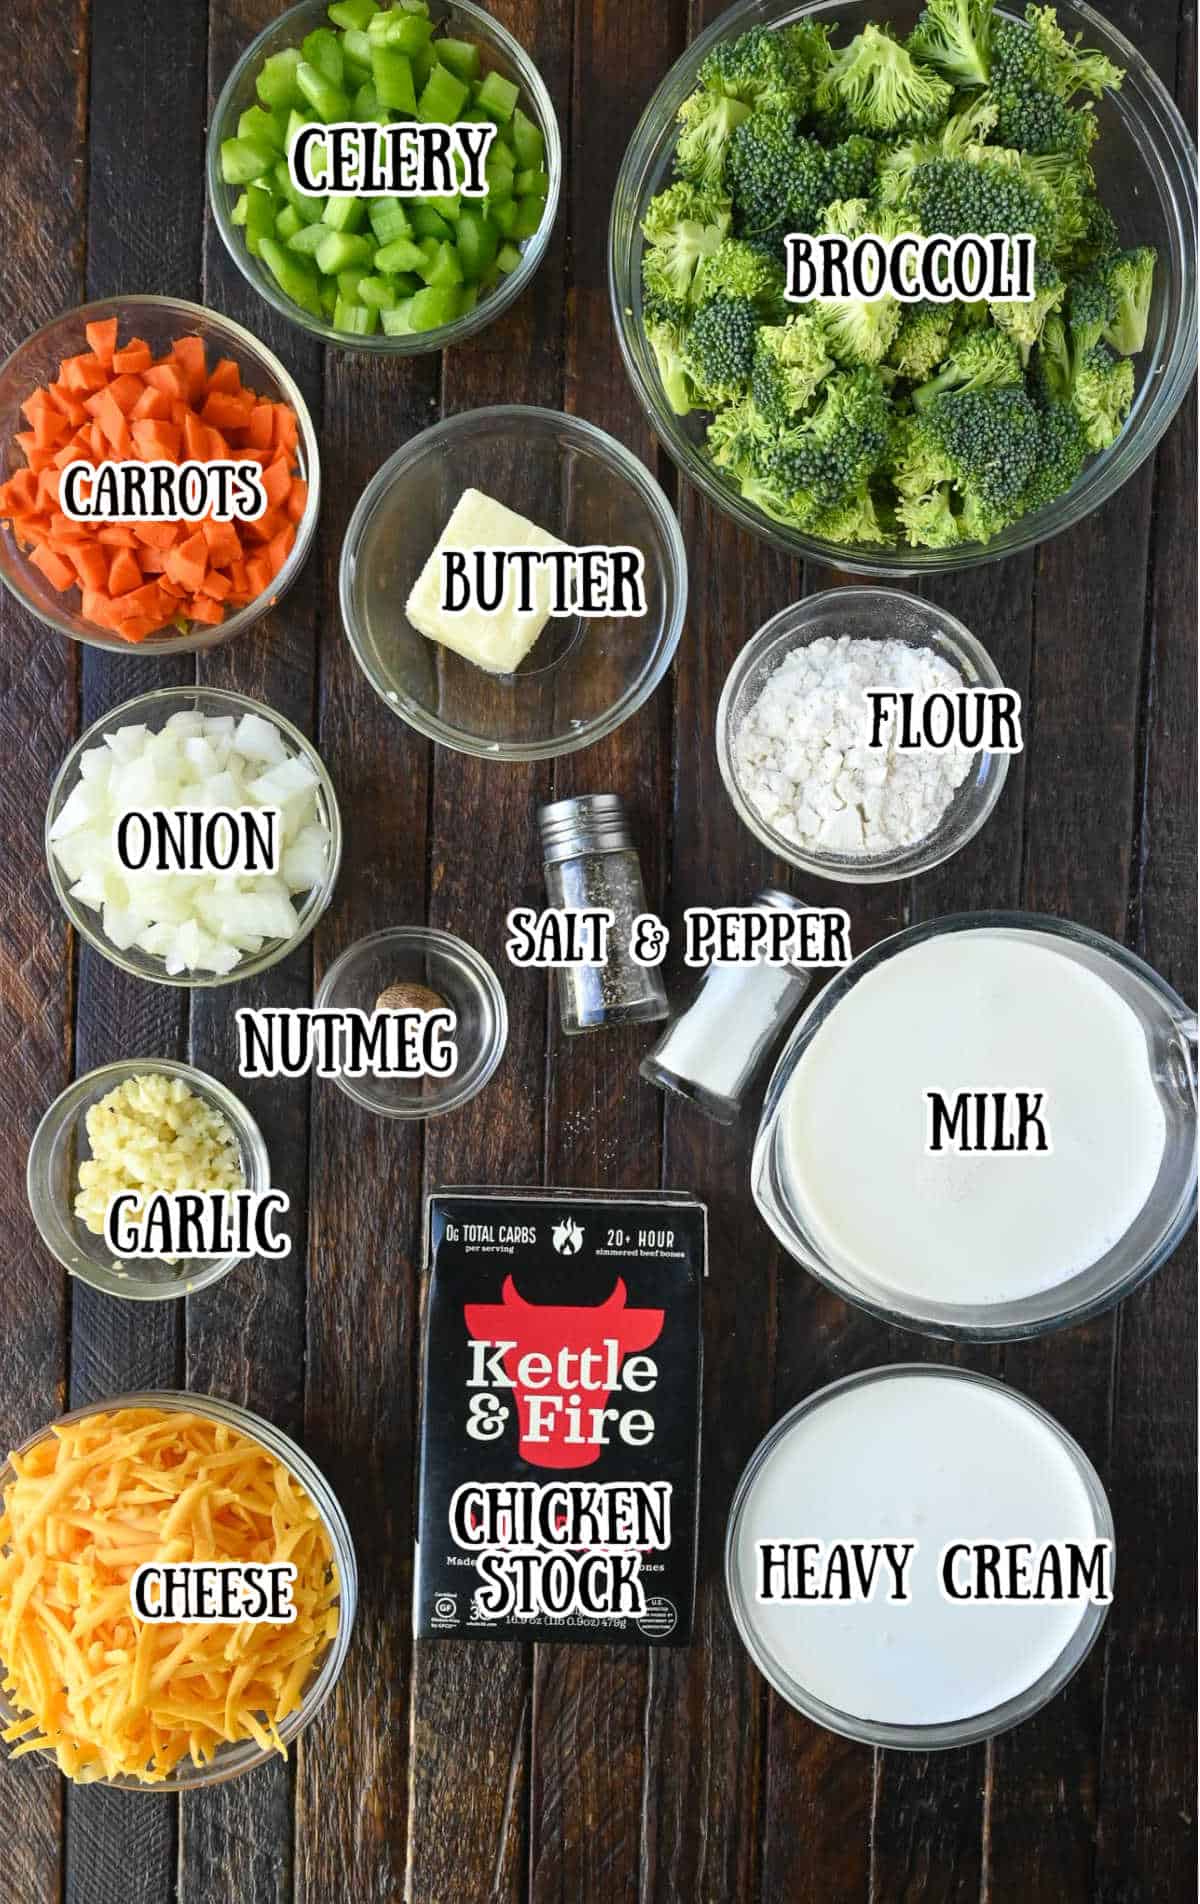 All the ingredients for this broccoli cheese soup.